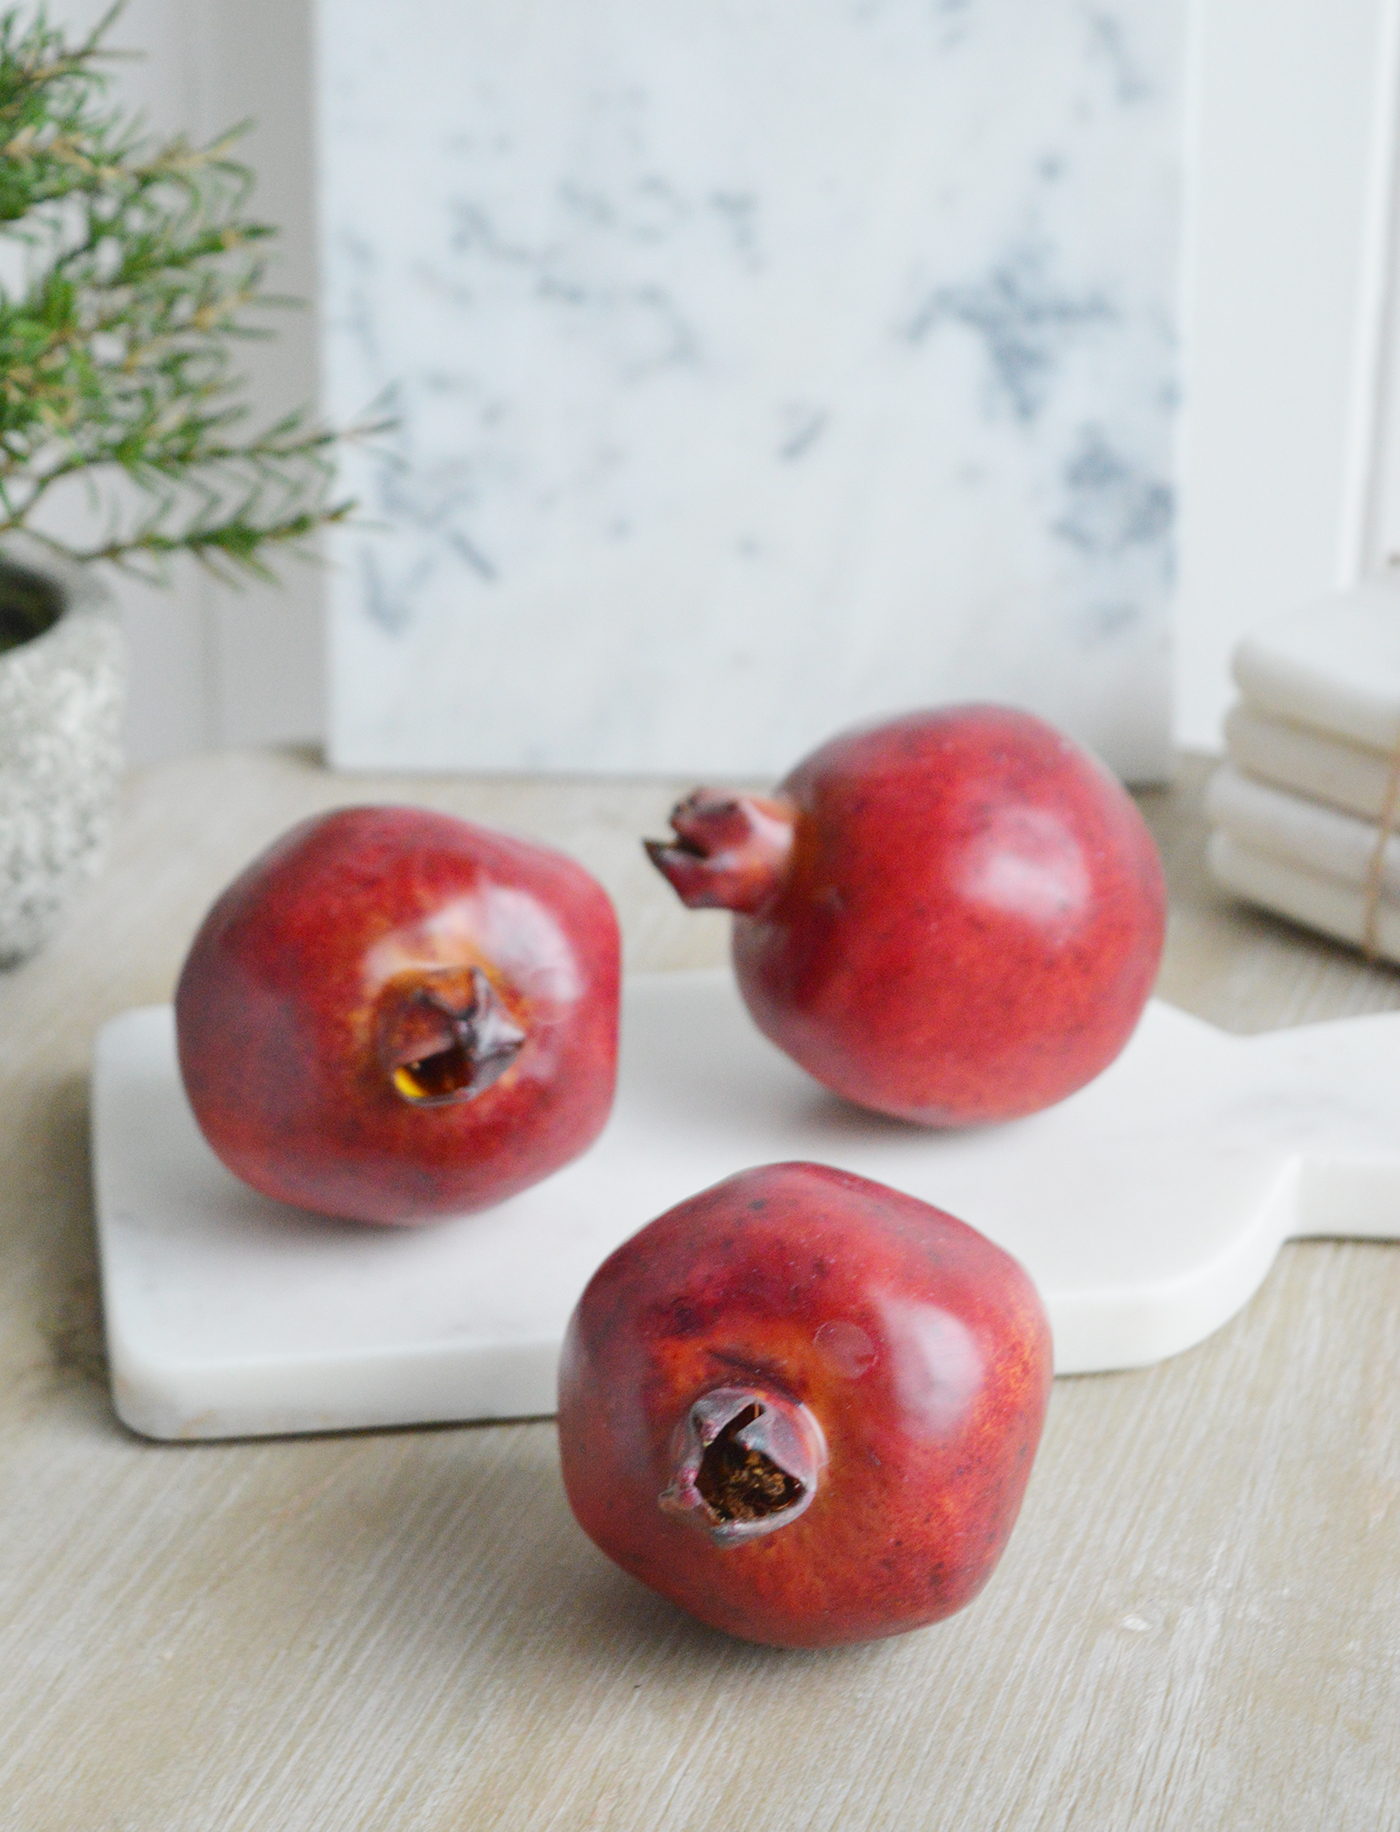 Add a touch of colour to your home with our beautiful, truly lifelike, Pomegranates.

Add to a fruit bowl or glass jar for a gorgeous display on your counter top or dining table